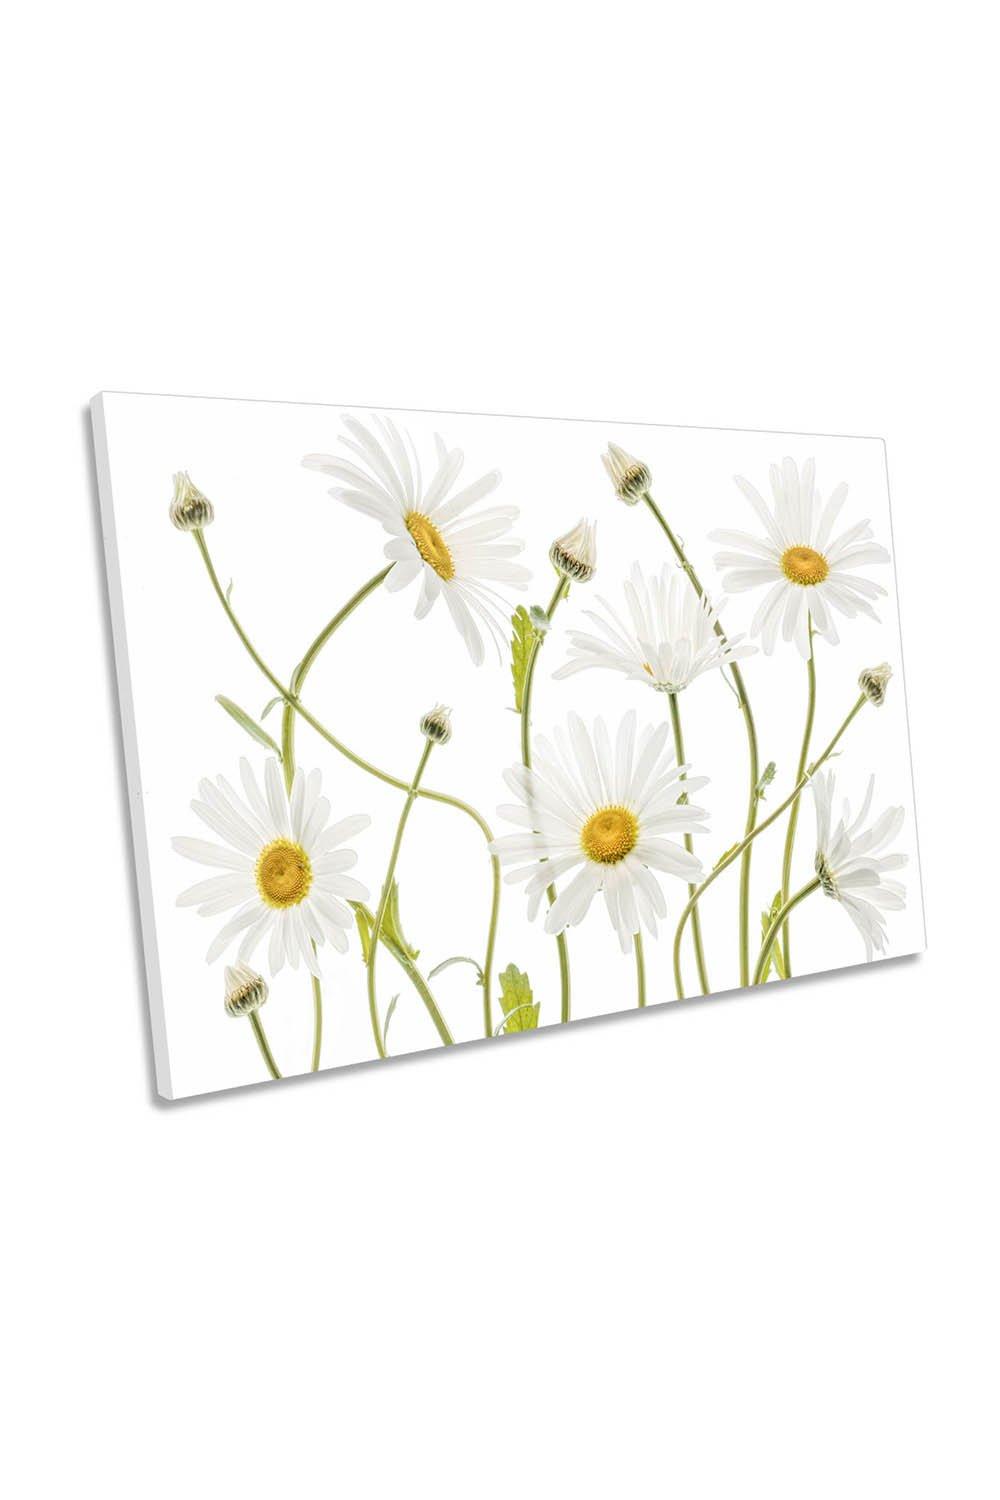 Ox Eye Daisy Flowers White Canvas Wall Art Picture Print